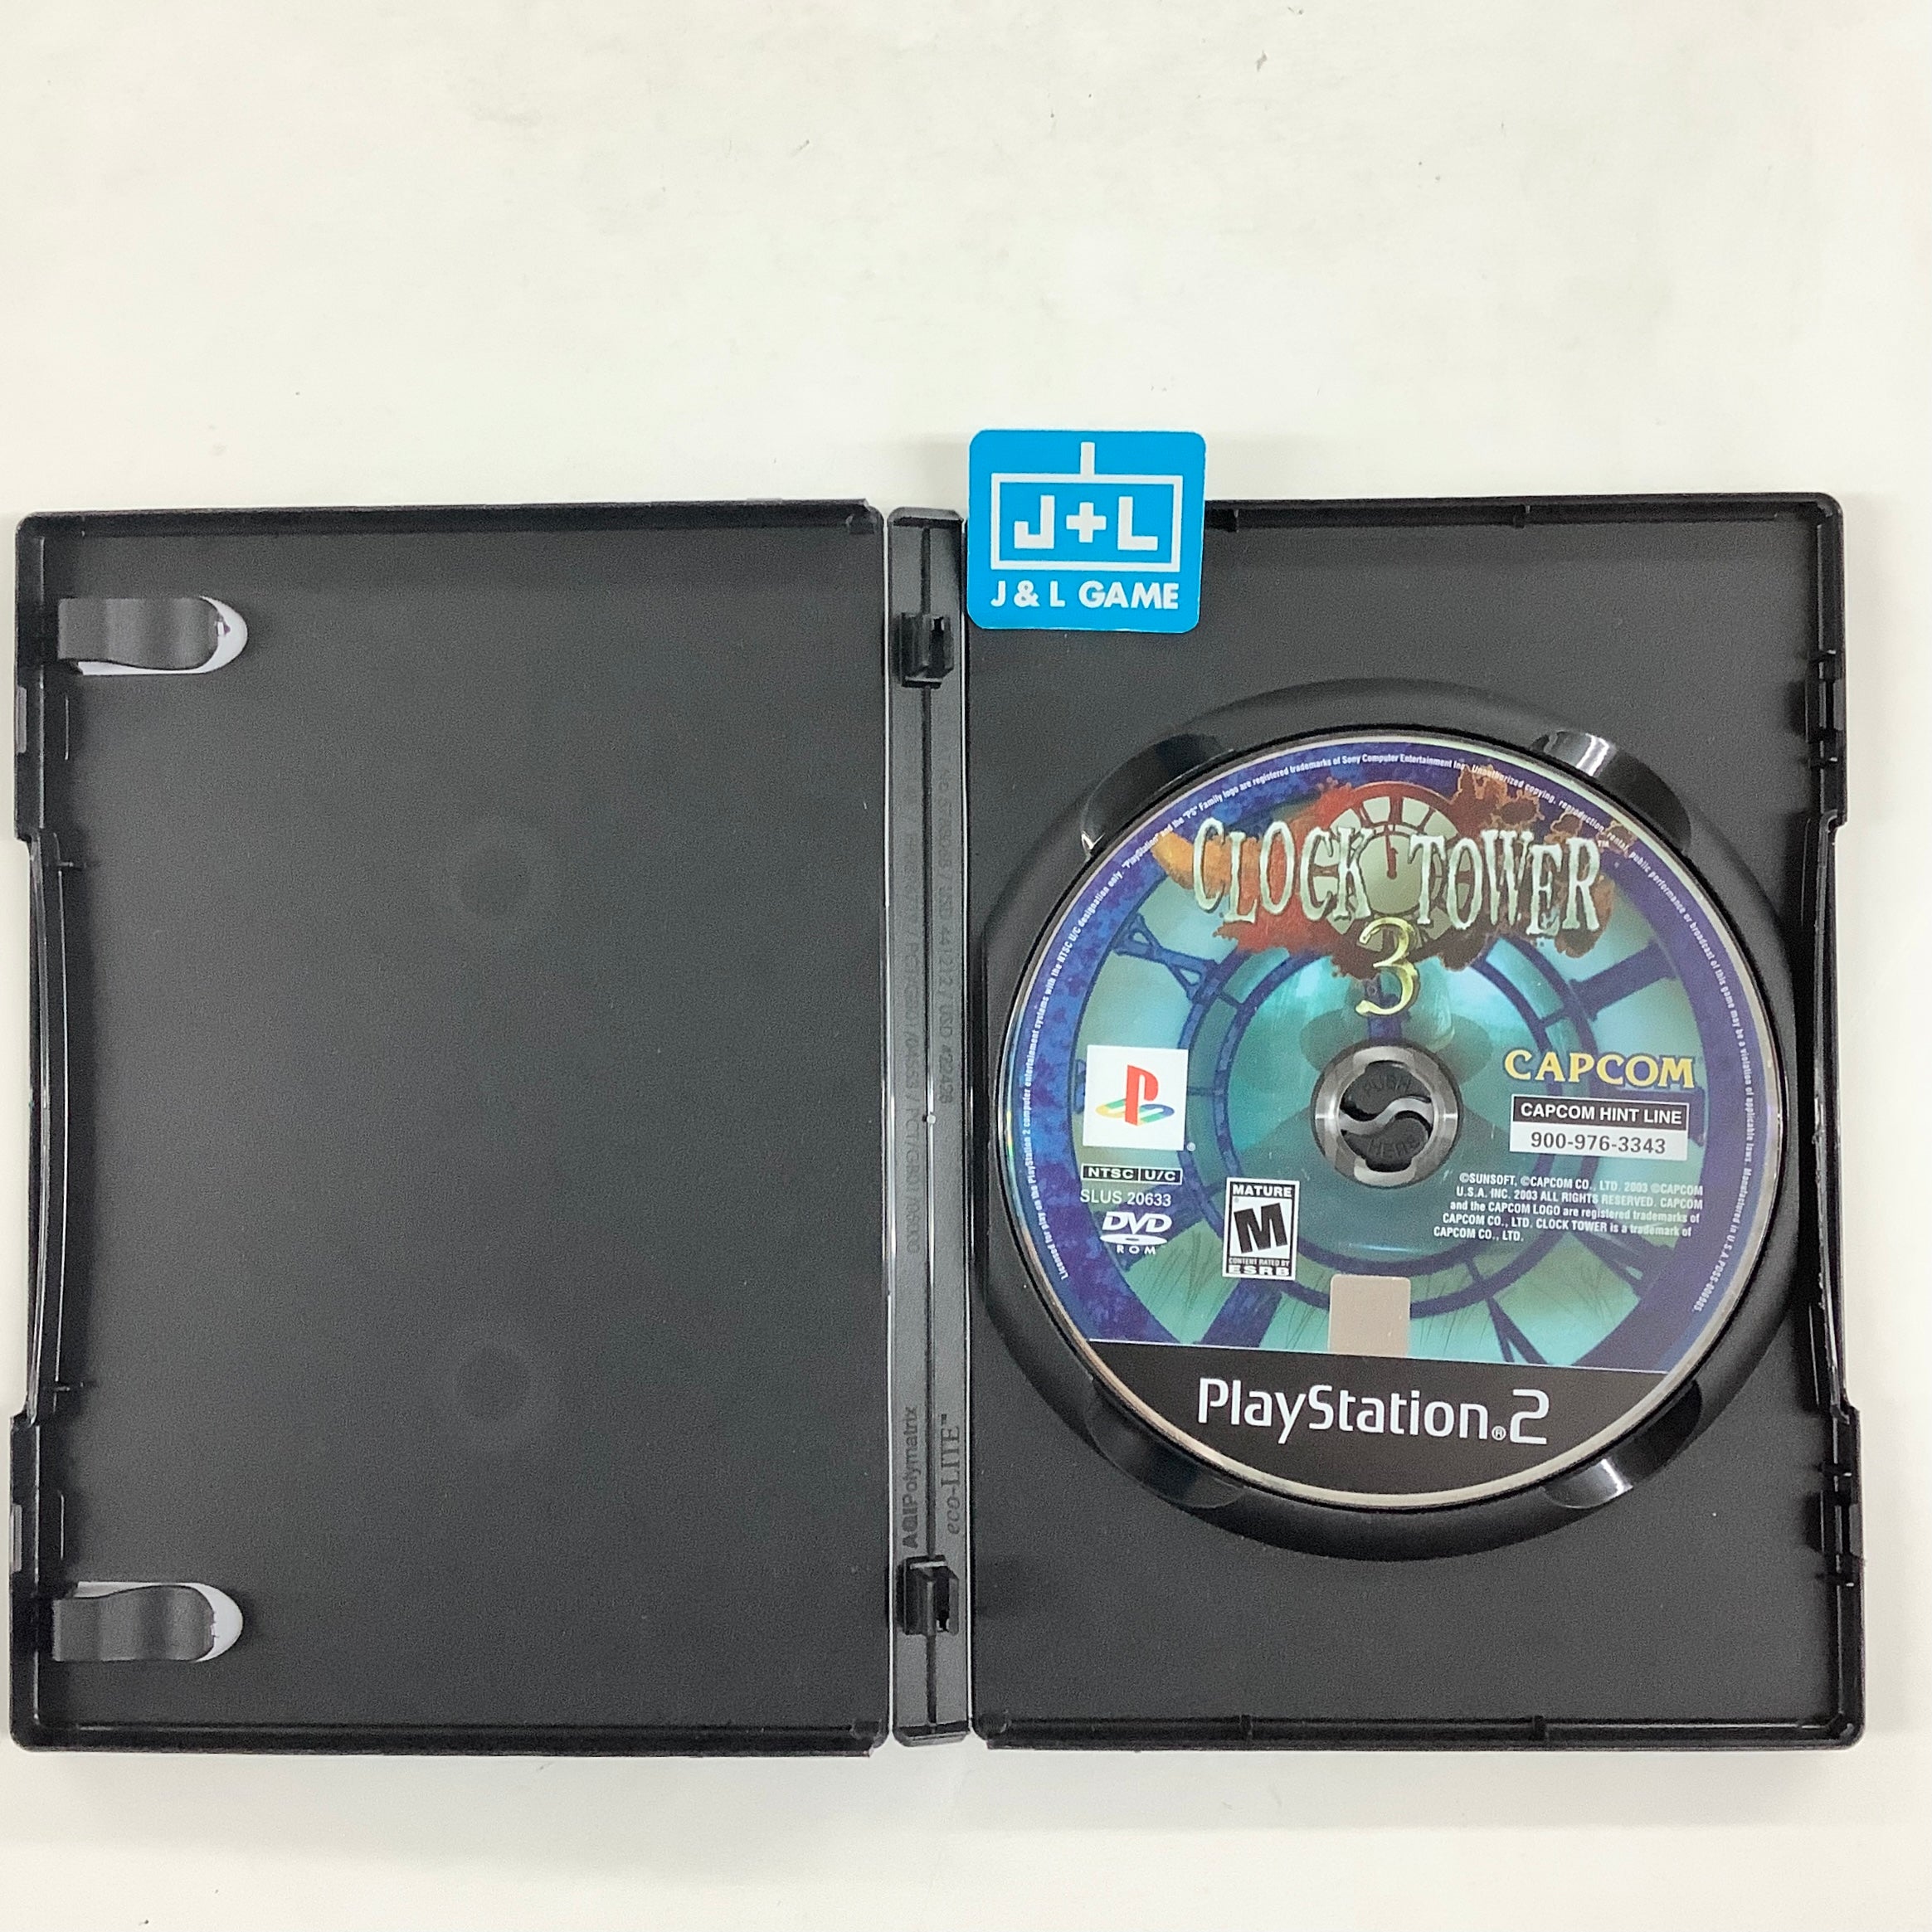 Clock Tower 3 - (PS2) PlayStation 2 [Pre-Owned] Video Games Capcom   